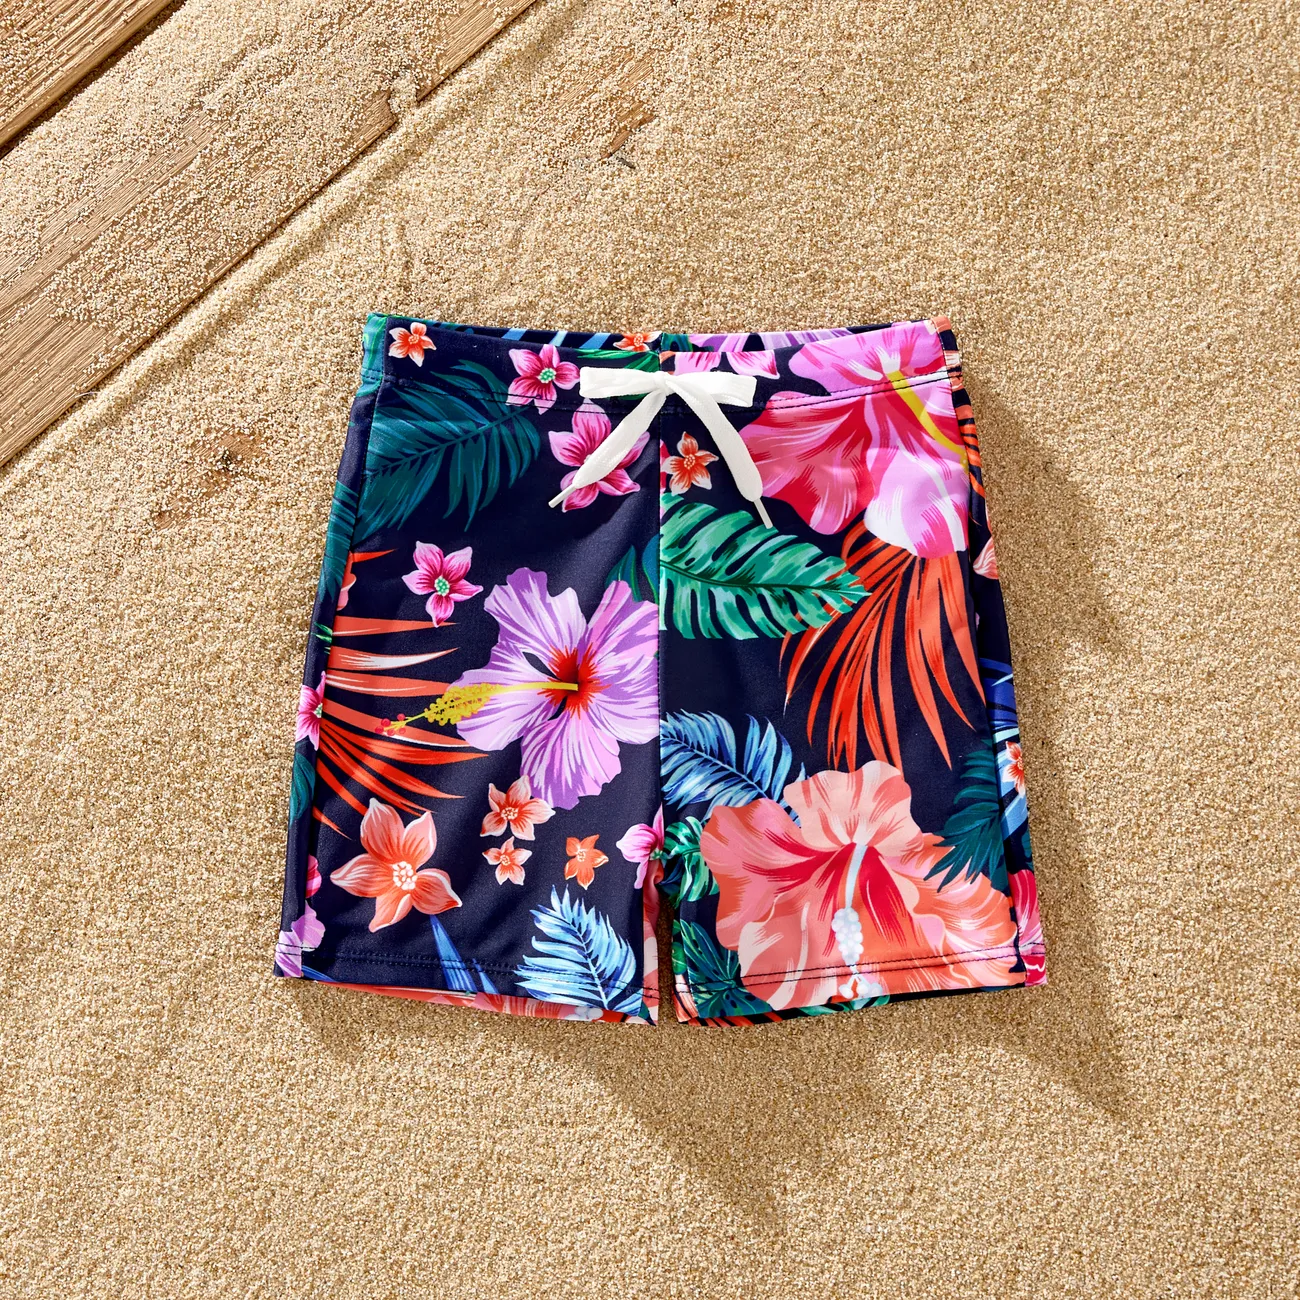 Family Matching Tropical Floral Drawstring Swim Trunks or Ruched Drawstring Side One-Piece Strap Swimsuit  Deep Blue big image 1